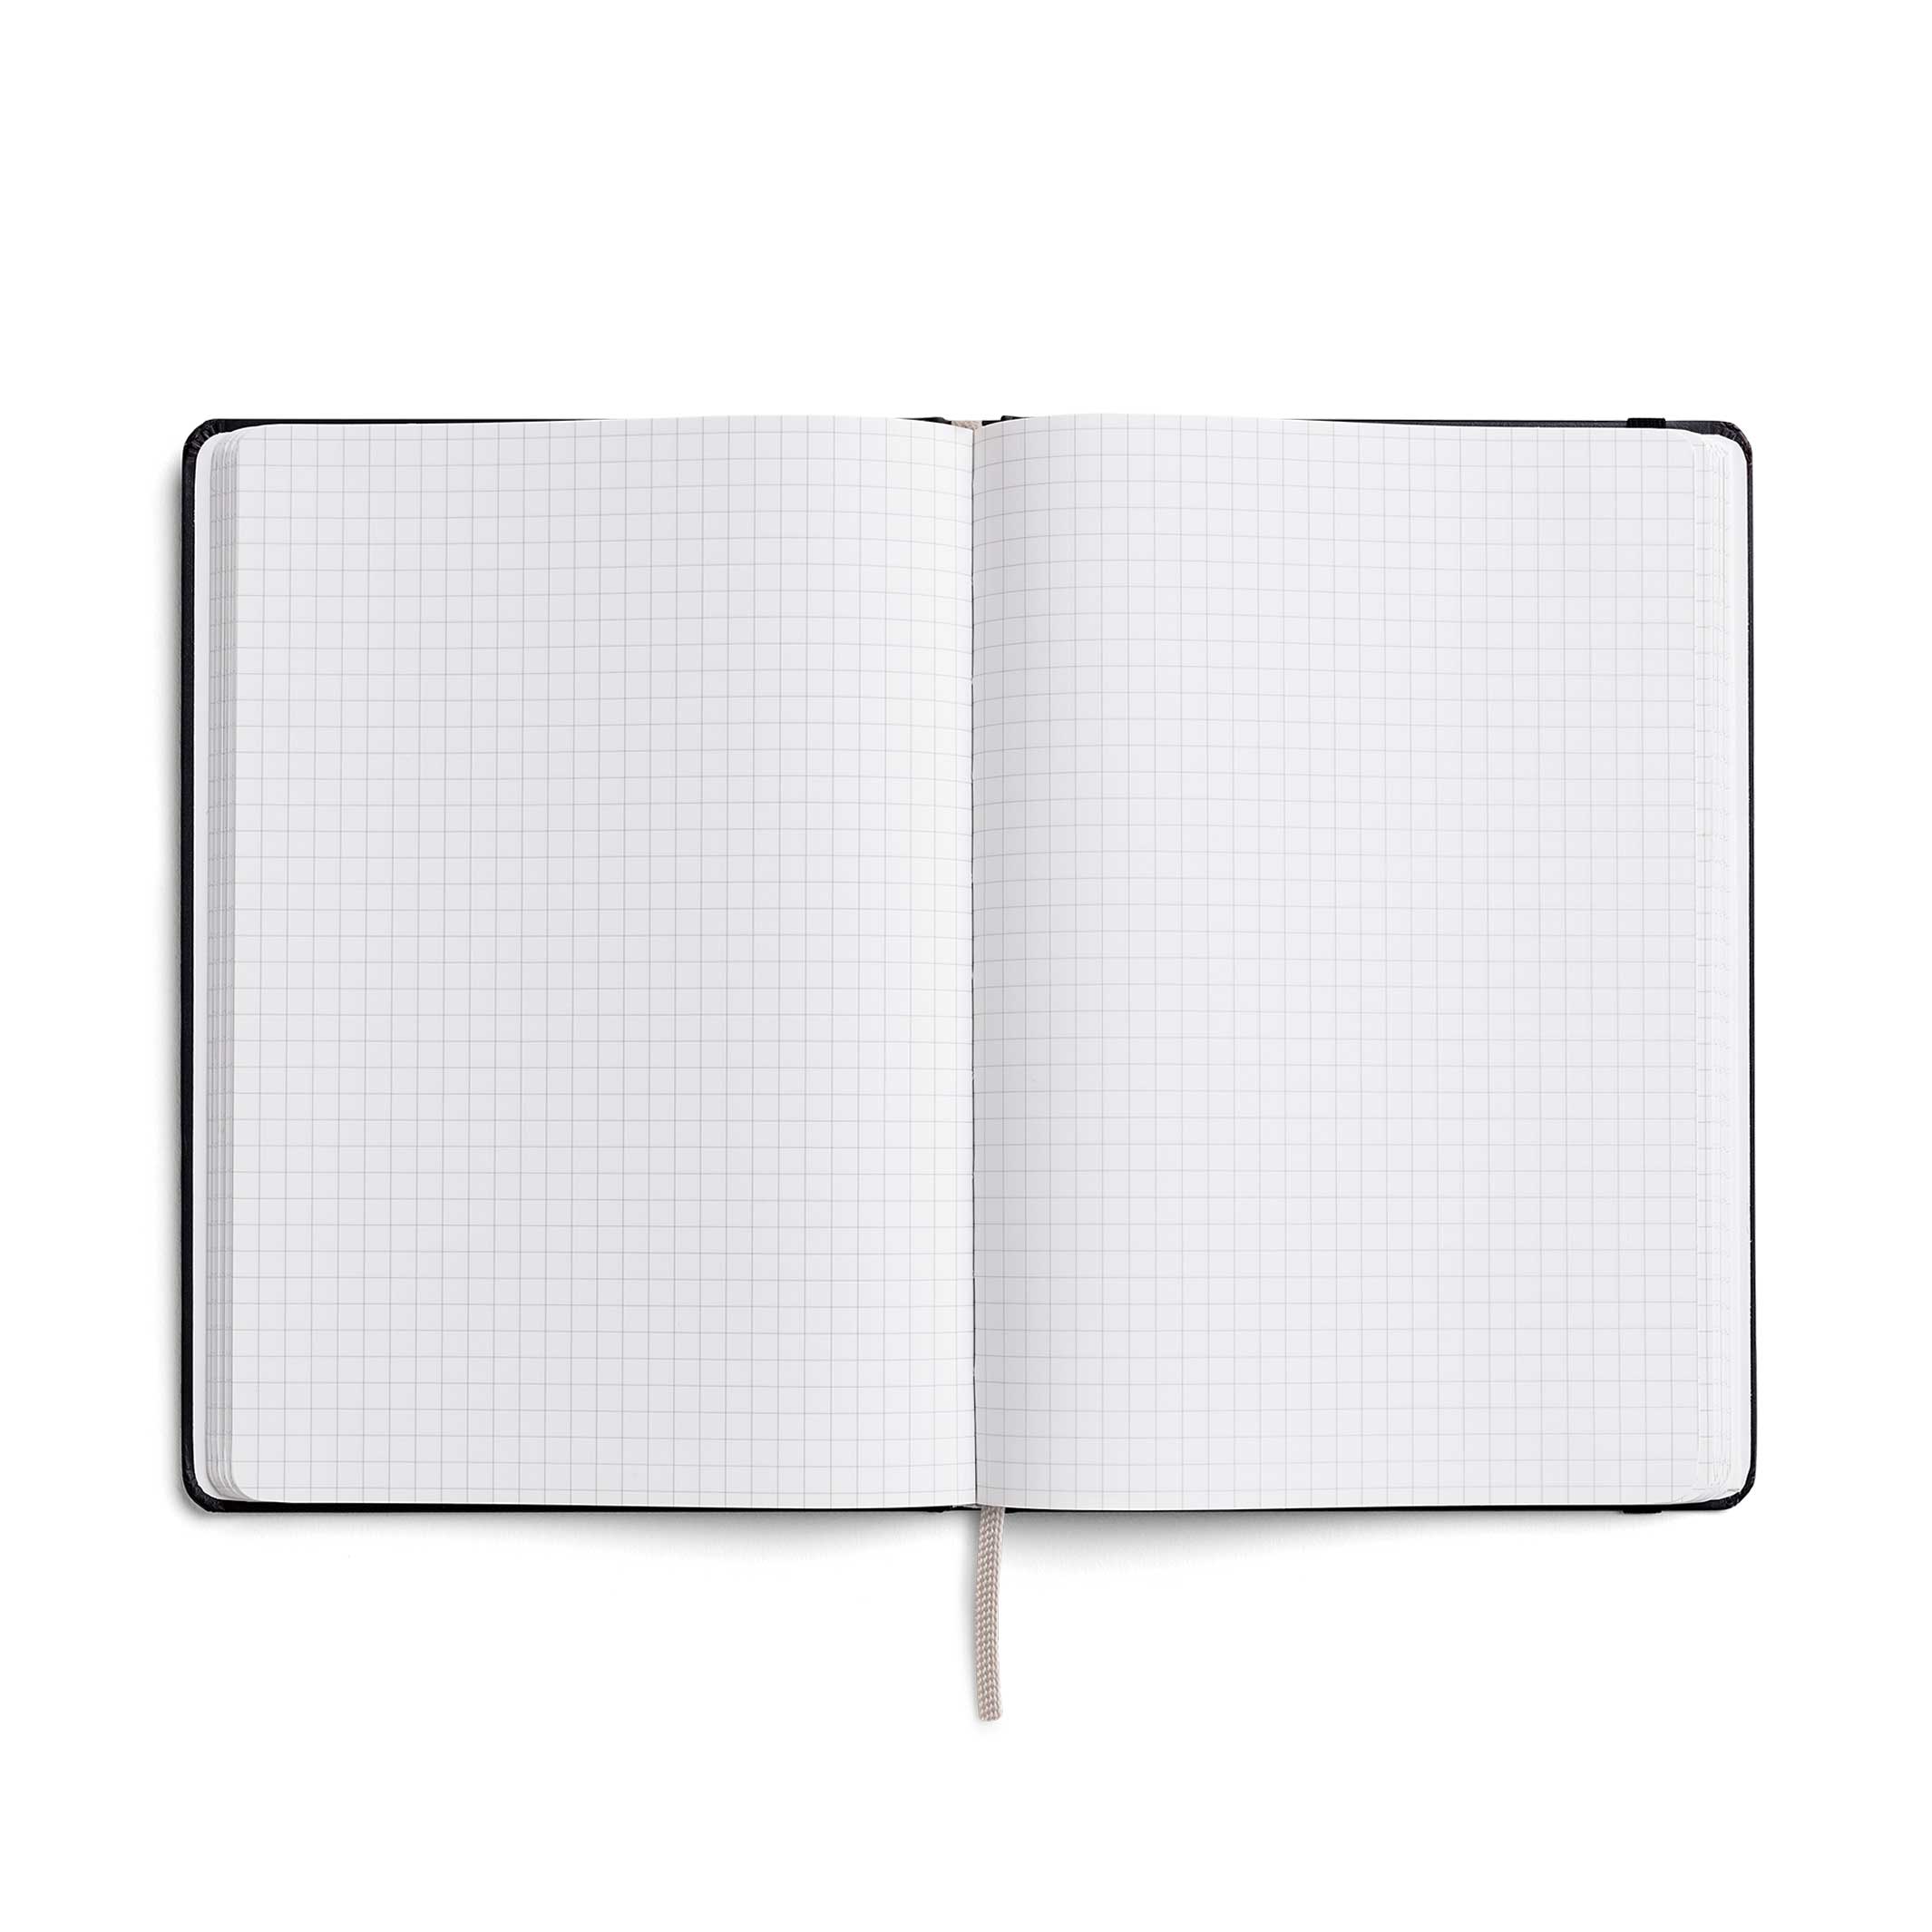 Hardcover NOTEBOOK A5 | Stone-graues NOTIZBUCH | Karst Stone Paper